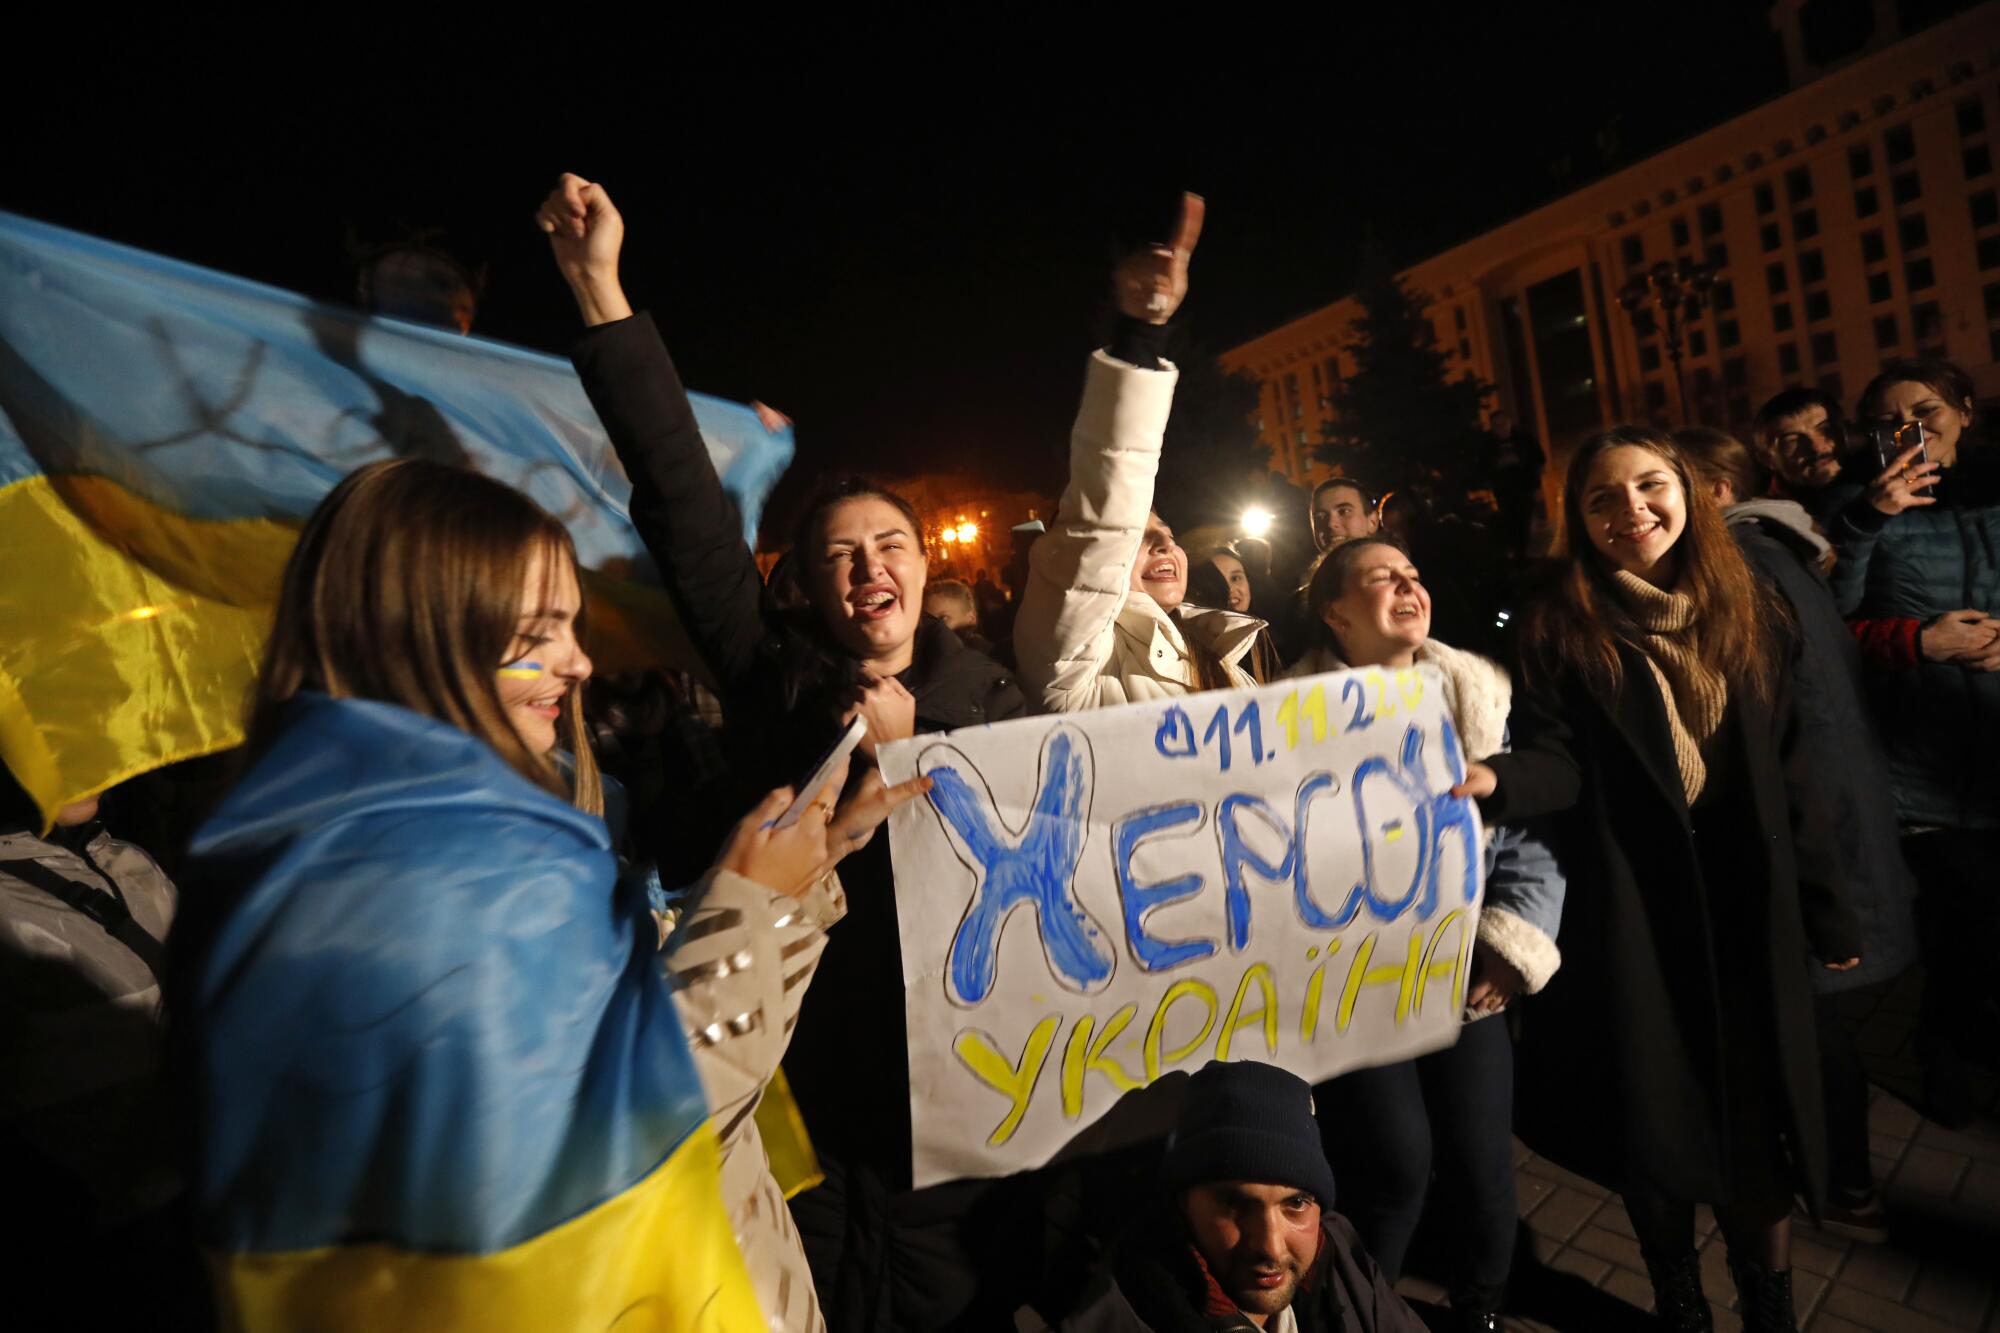 A crowd of cheering people holding signs and the Ukrainian flag